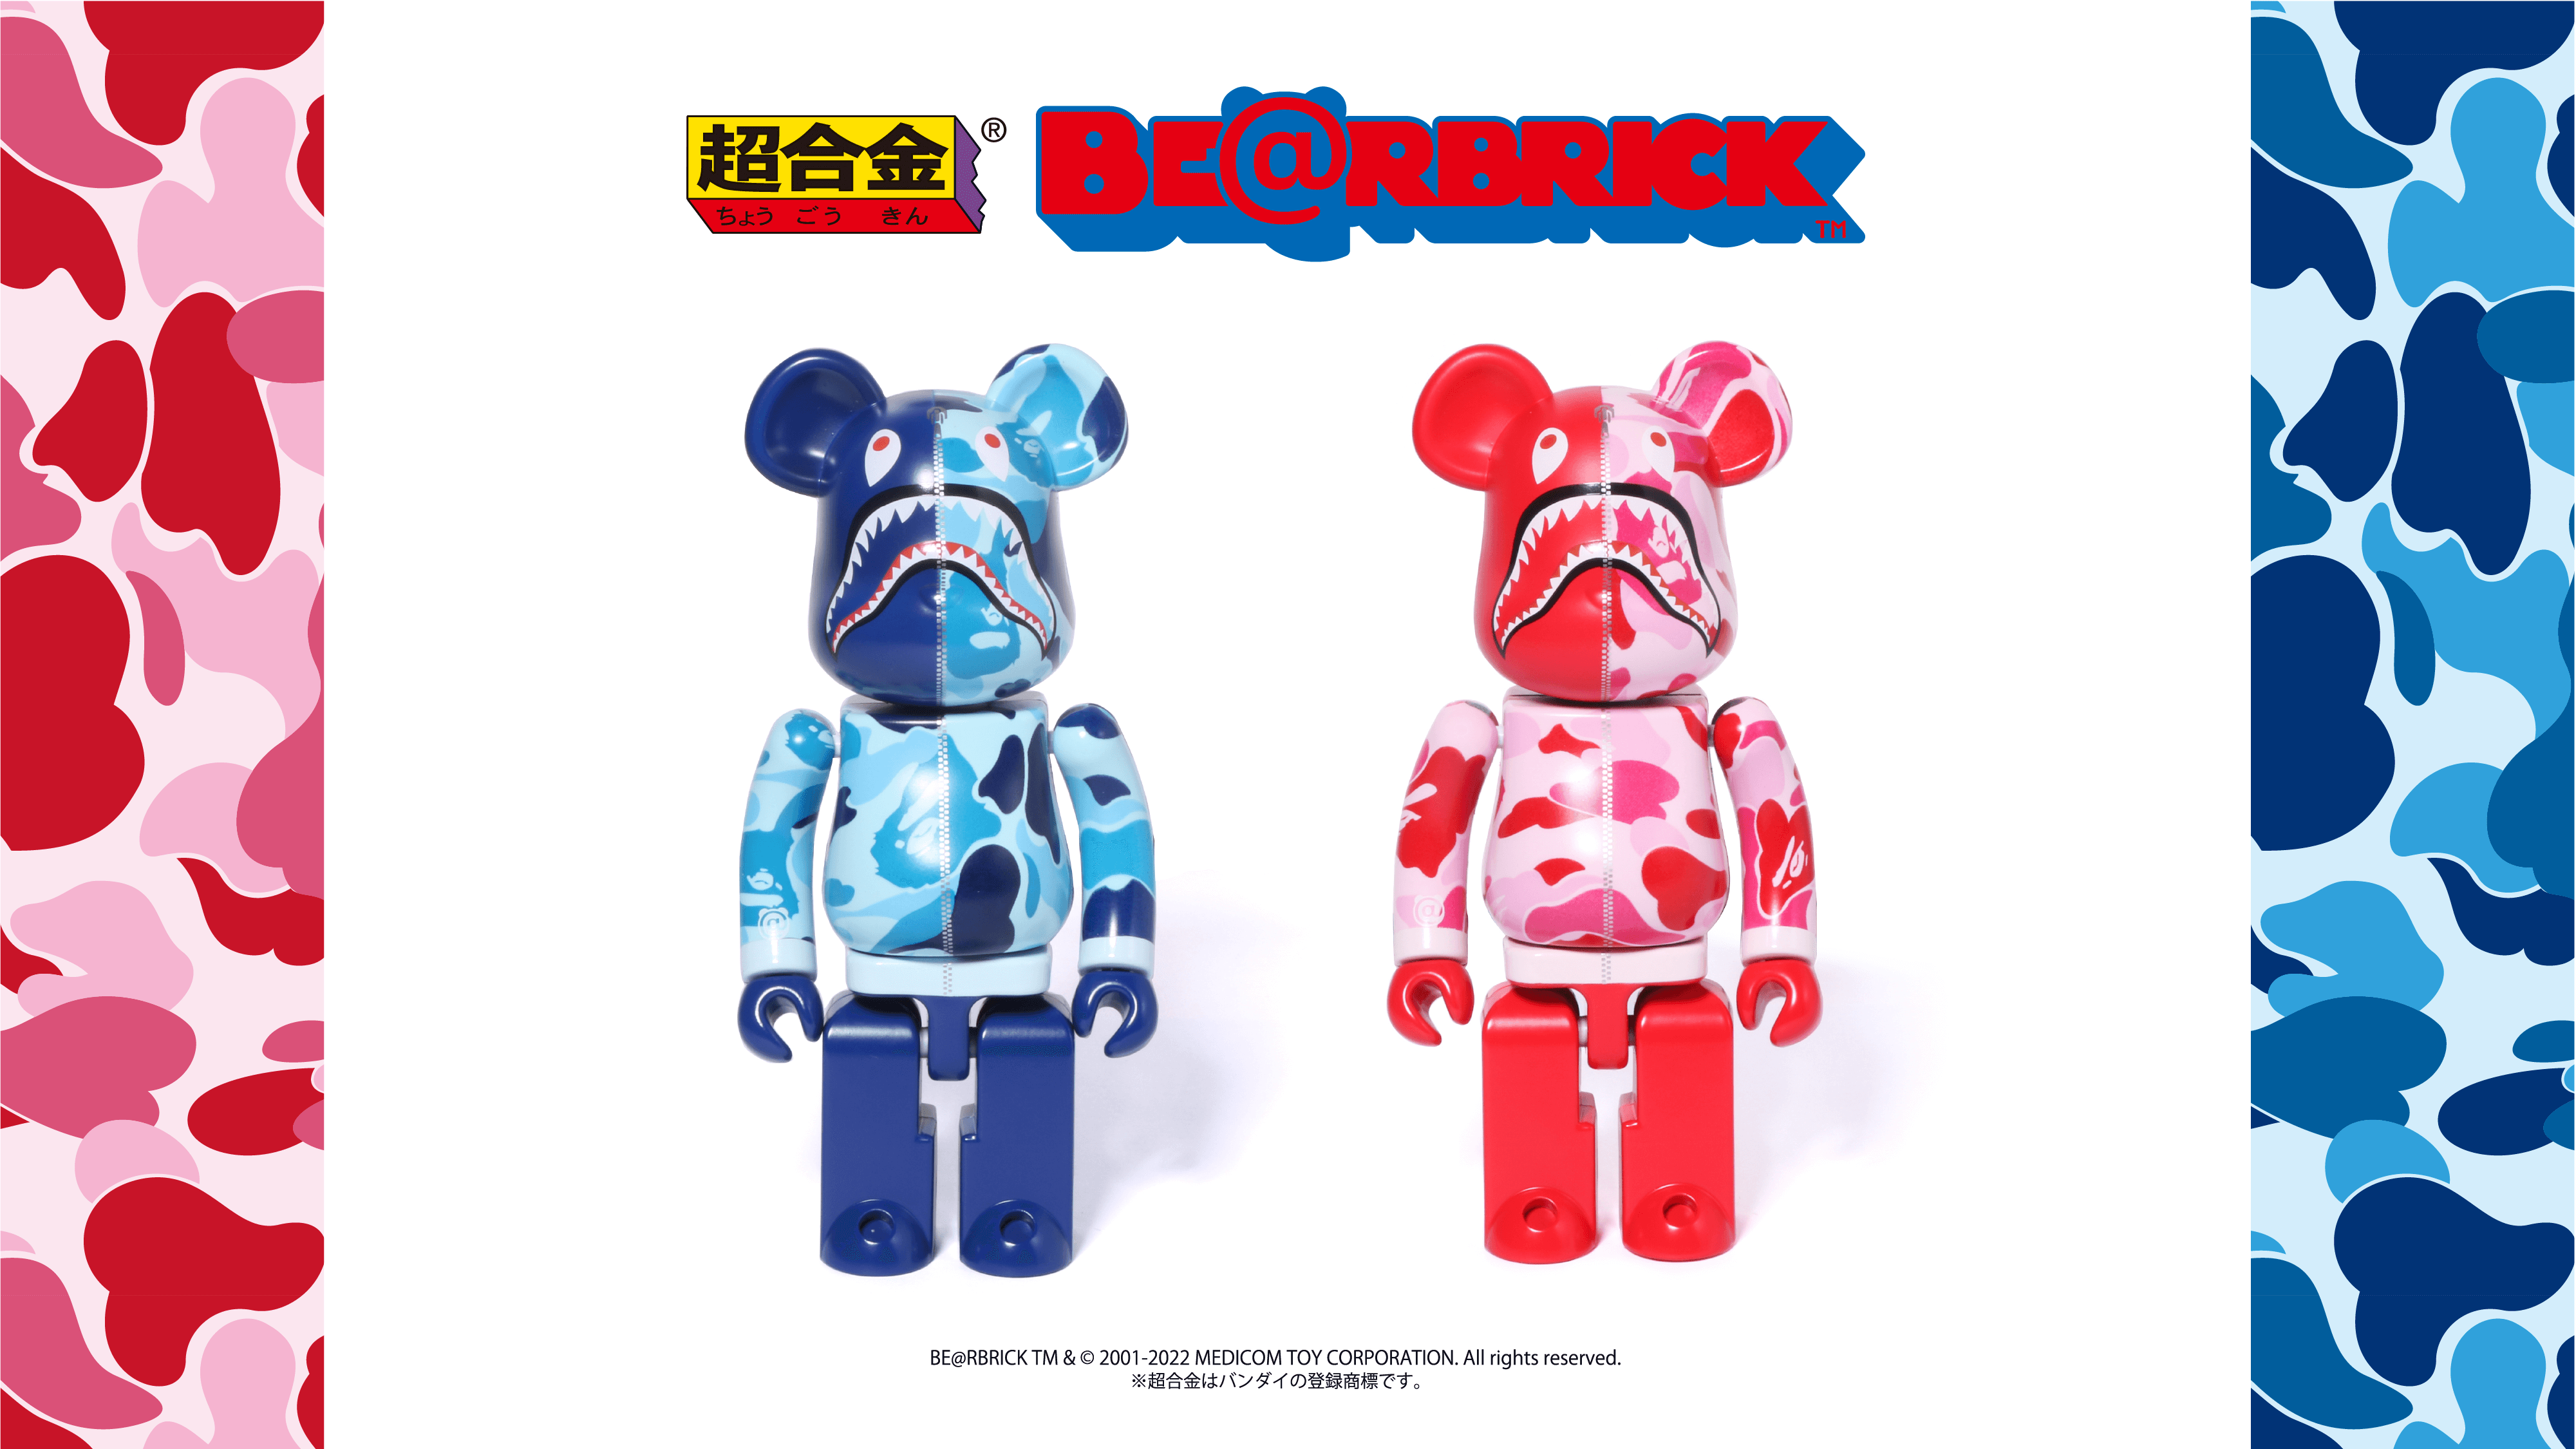 Chogokin, BE@RBRICK, and BAPE Team Up for Triple Collaboration